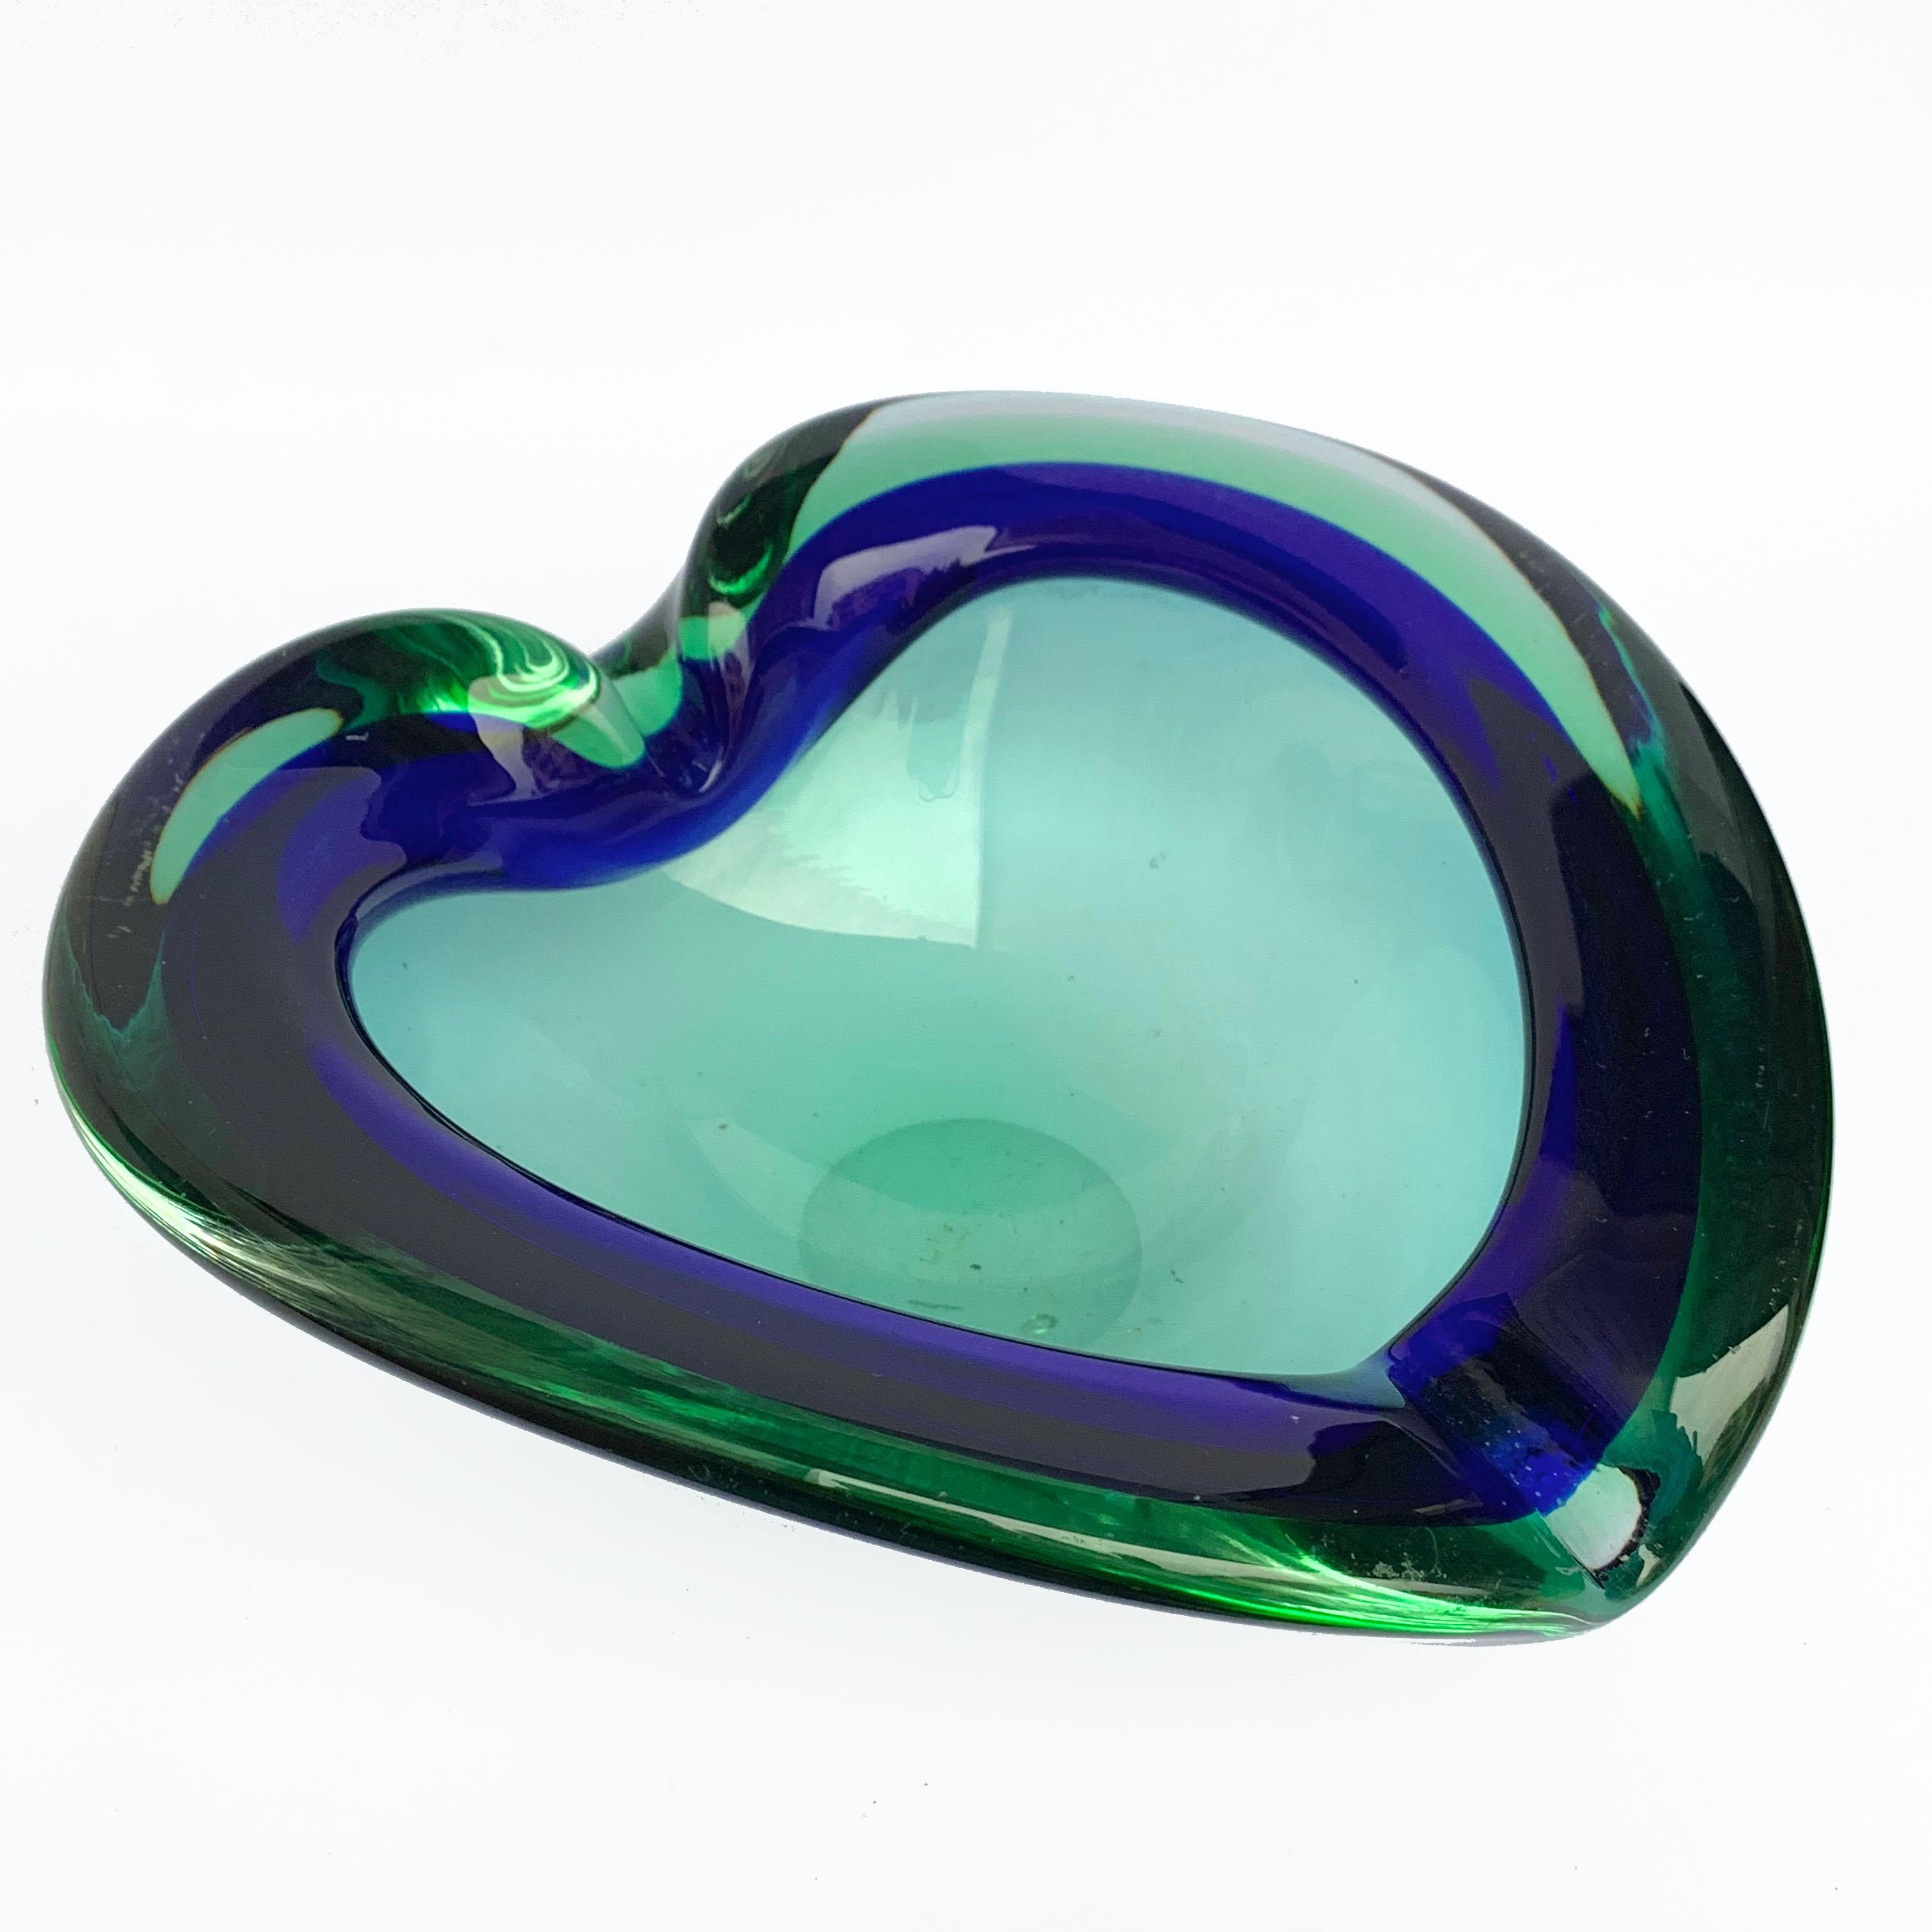 Heart-shaped, glass bowl or ashtray. Green and blue. Glass Sommerso Murano, Italy, 1960s.
No chipping, the one highlighted in red is an internal sign.